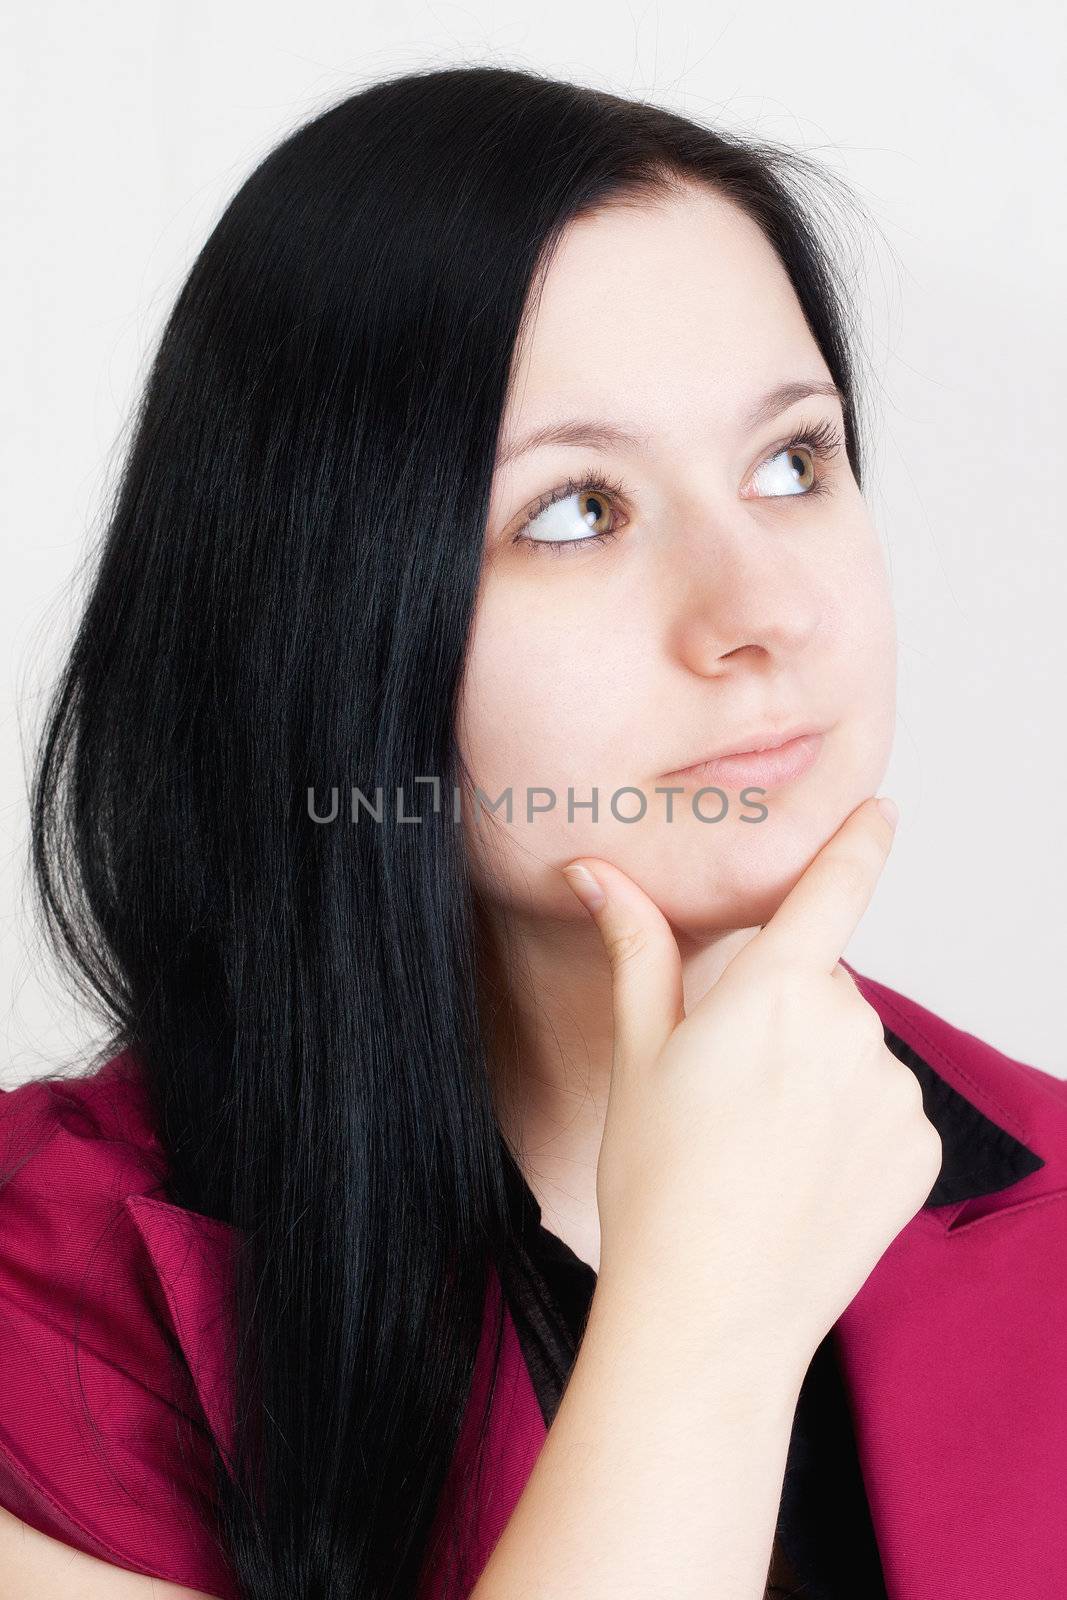 Black Haired Businesswoman is thinking on white background